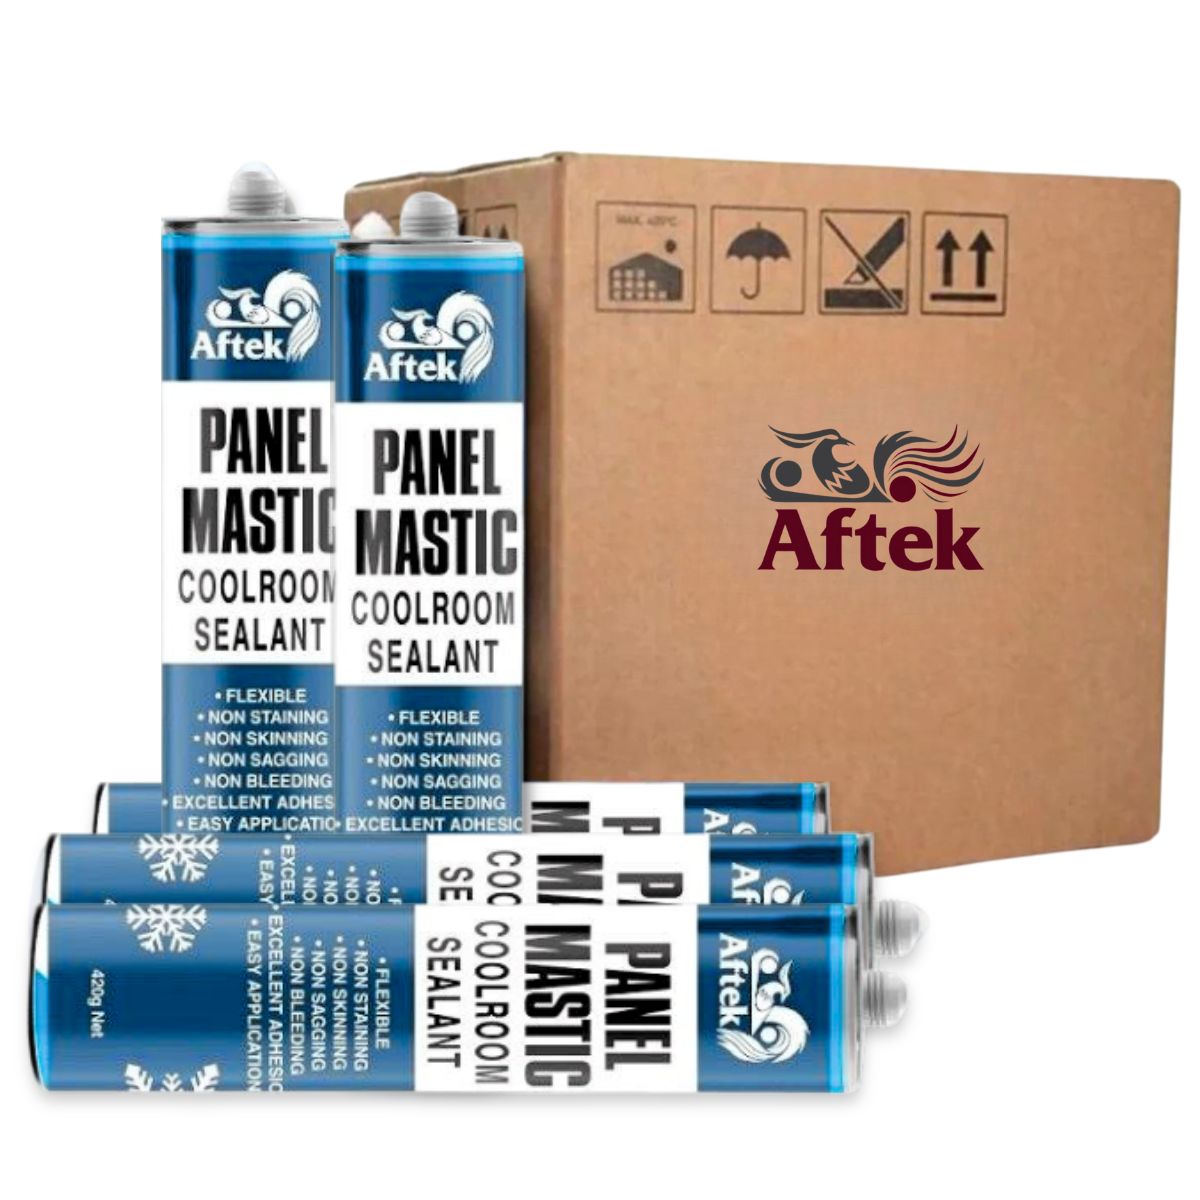 Aftek Panel Mastic Coolroom Sealant 420g, 20 Cartridges - South East Clearance Centre